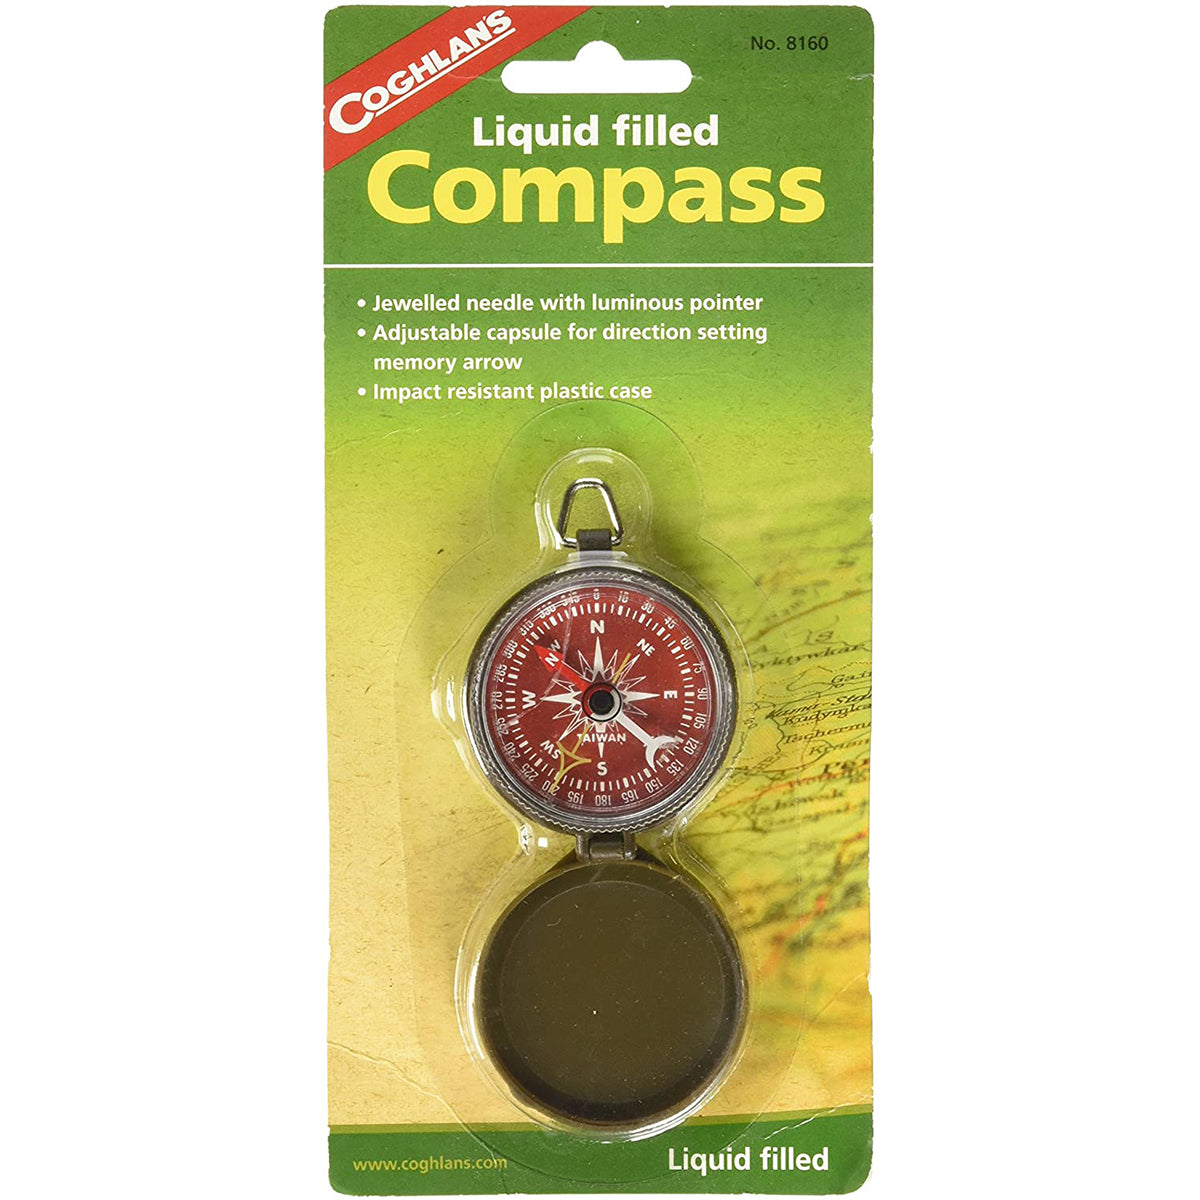 Coghlan's Liquid Filled Pocket Compass with Case, Survival Camping Outdoors Coghlan's